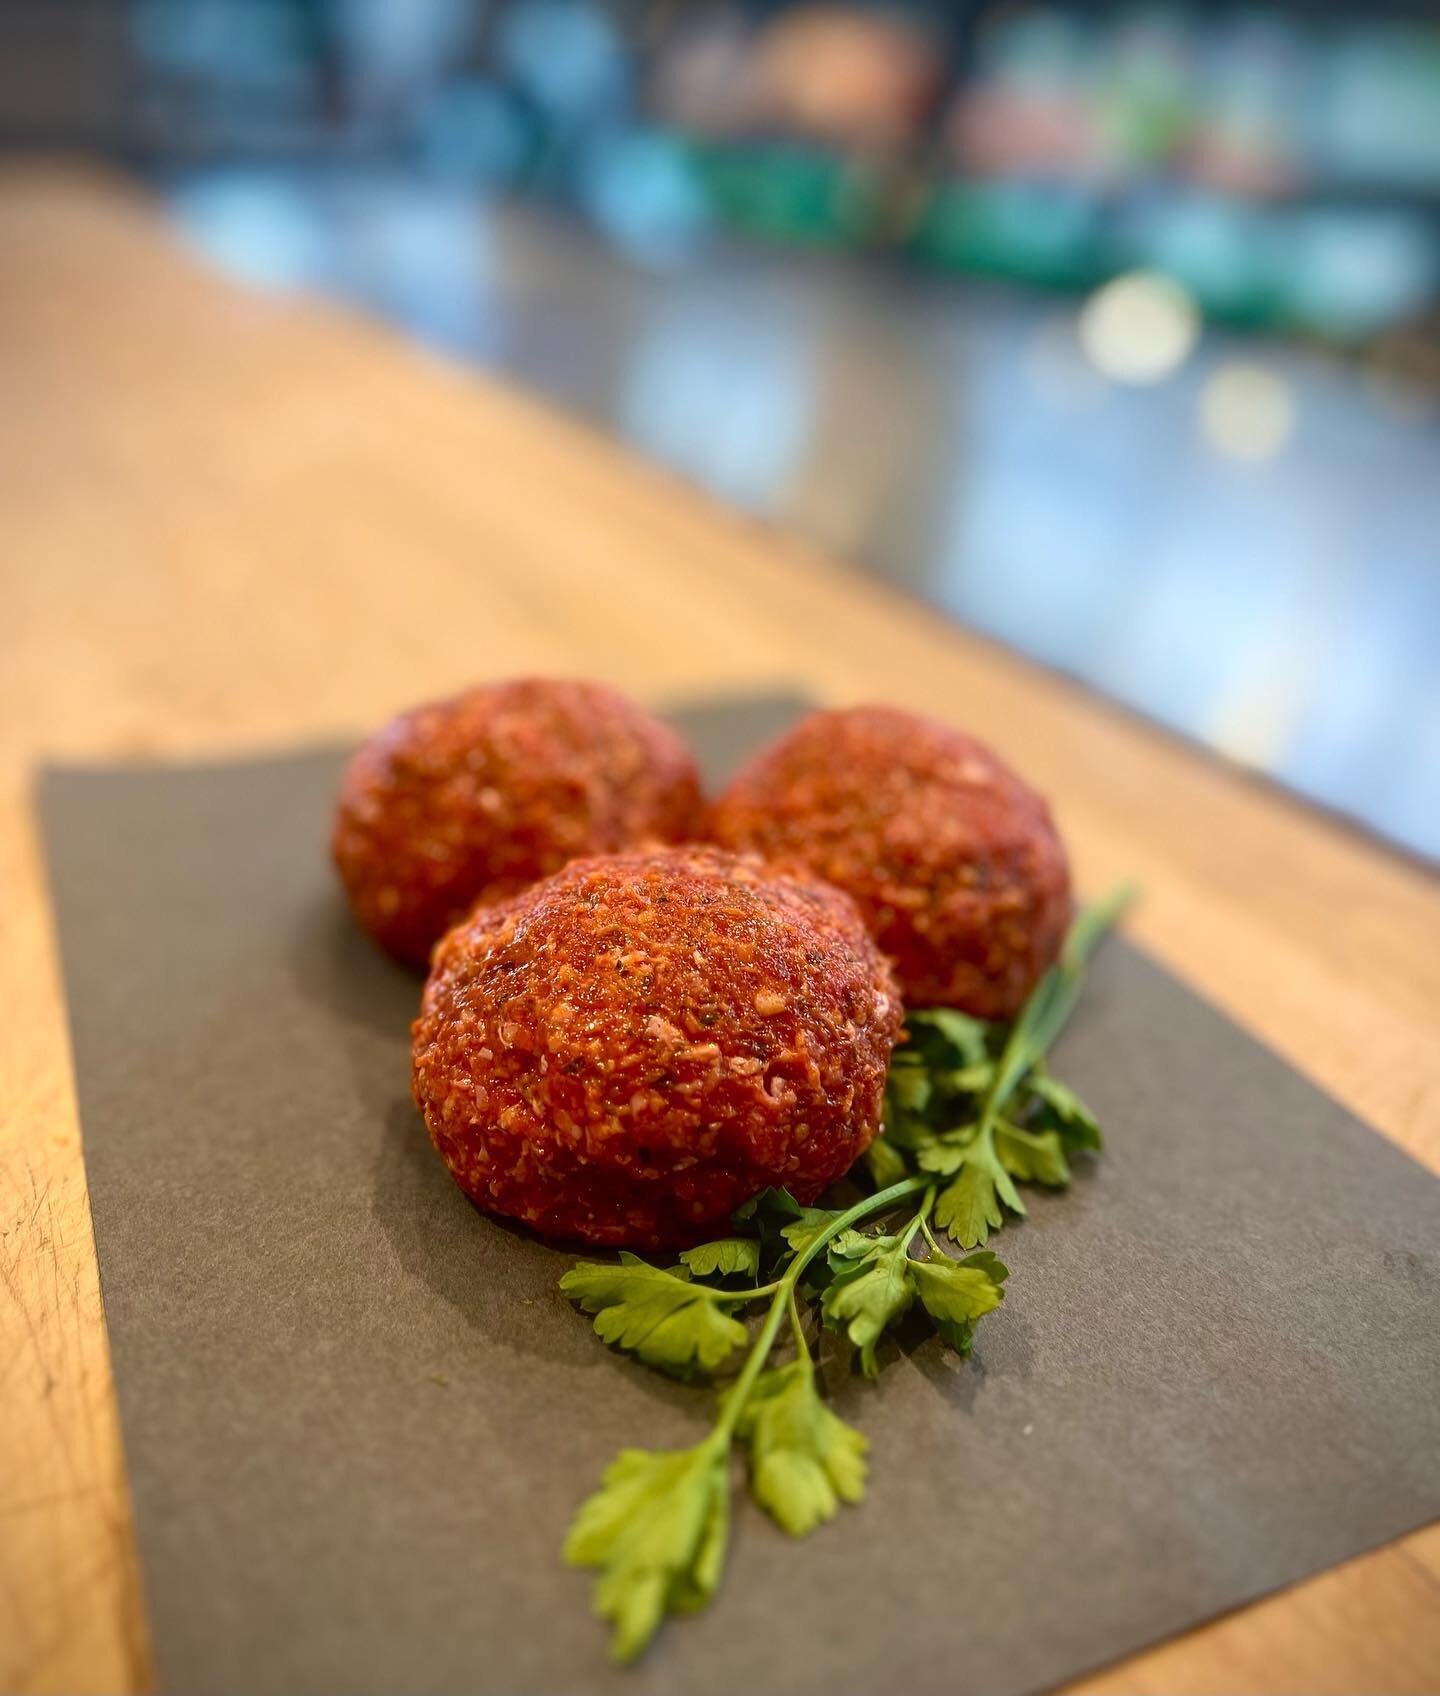 Comfort at its finest. Freshly made tomato basil lean ground meatballs 🍝 🌿 
. 📸 @maxver125 
.
.
.
#richmondbc #steveston #vancouver #yvr #foodstagram #foodnetworkca #dishedvan #vancouvereats #beautifulbc #igersvancouver #curiocityvancouver #buzzfe